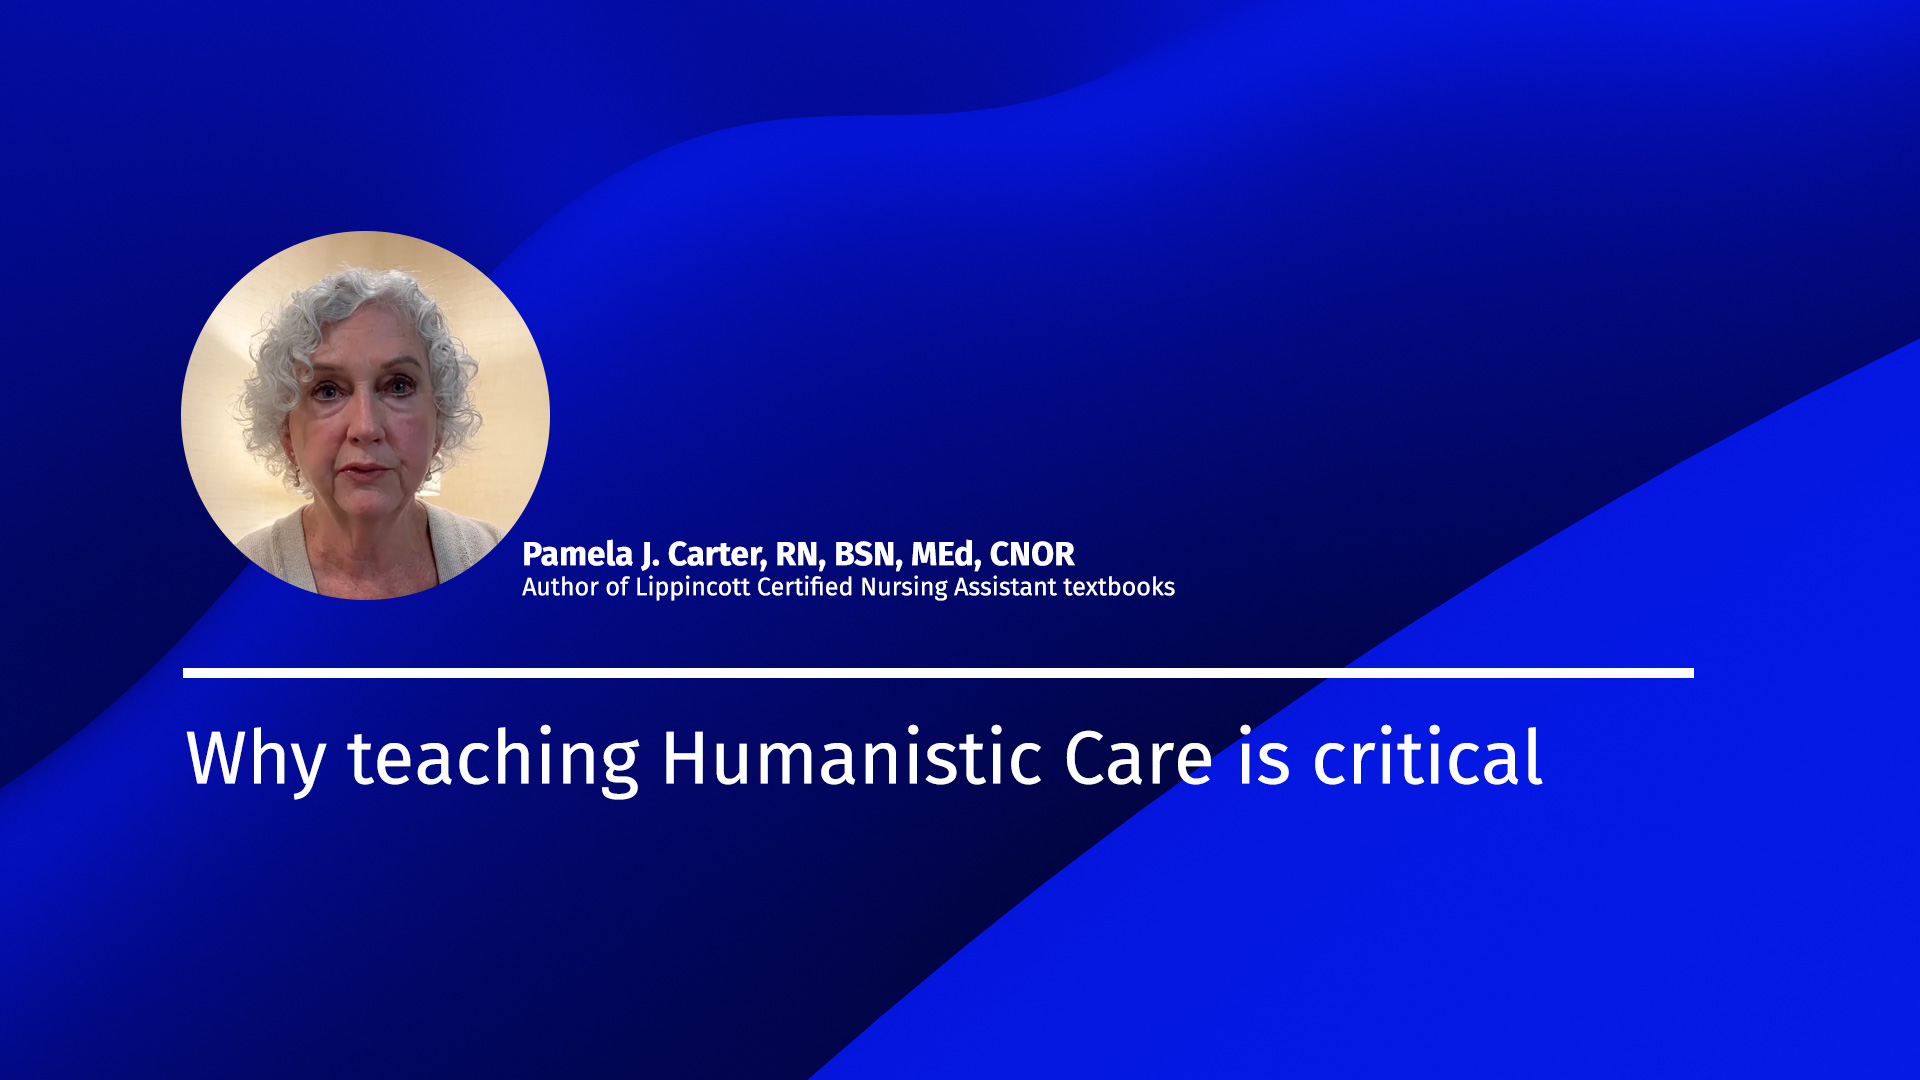 Pam Carter explains why teaching Humanistic Care is Critical